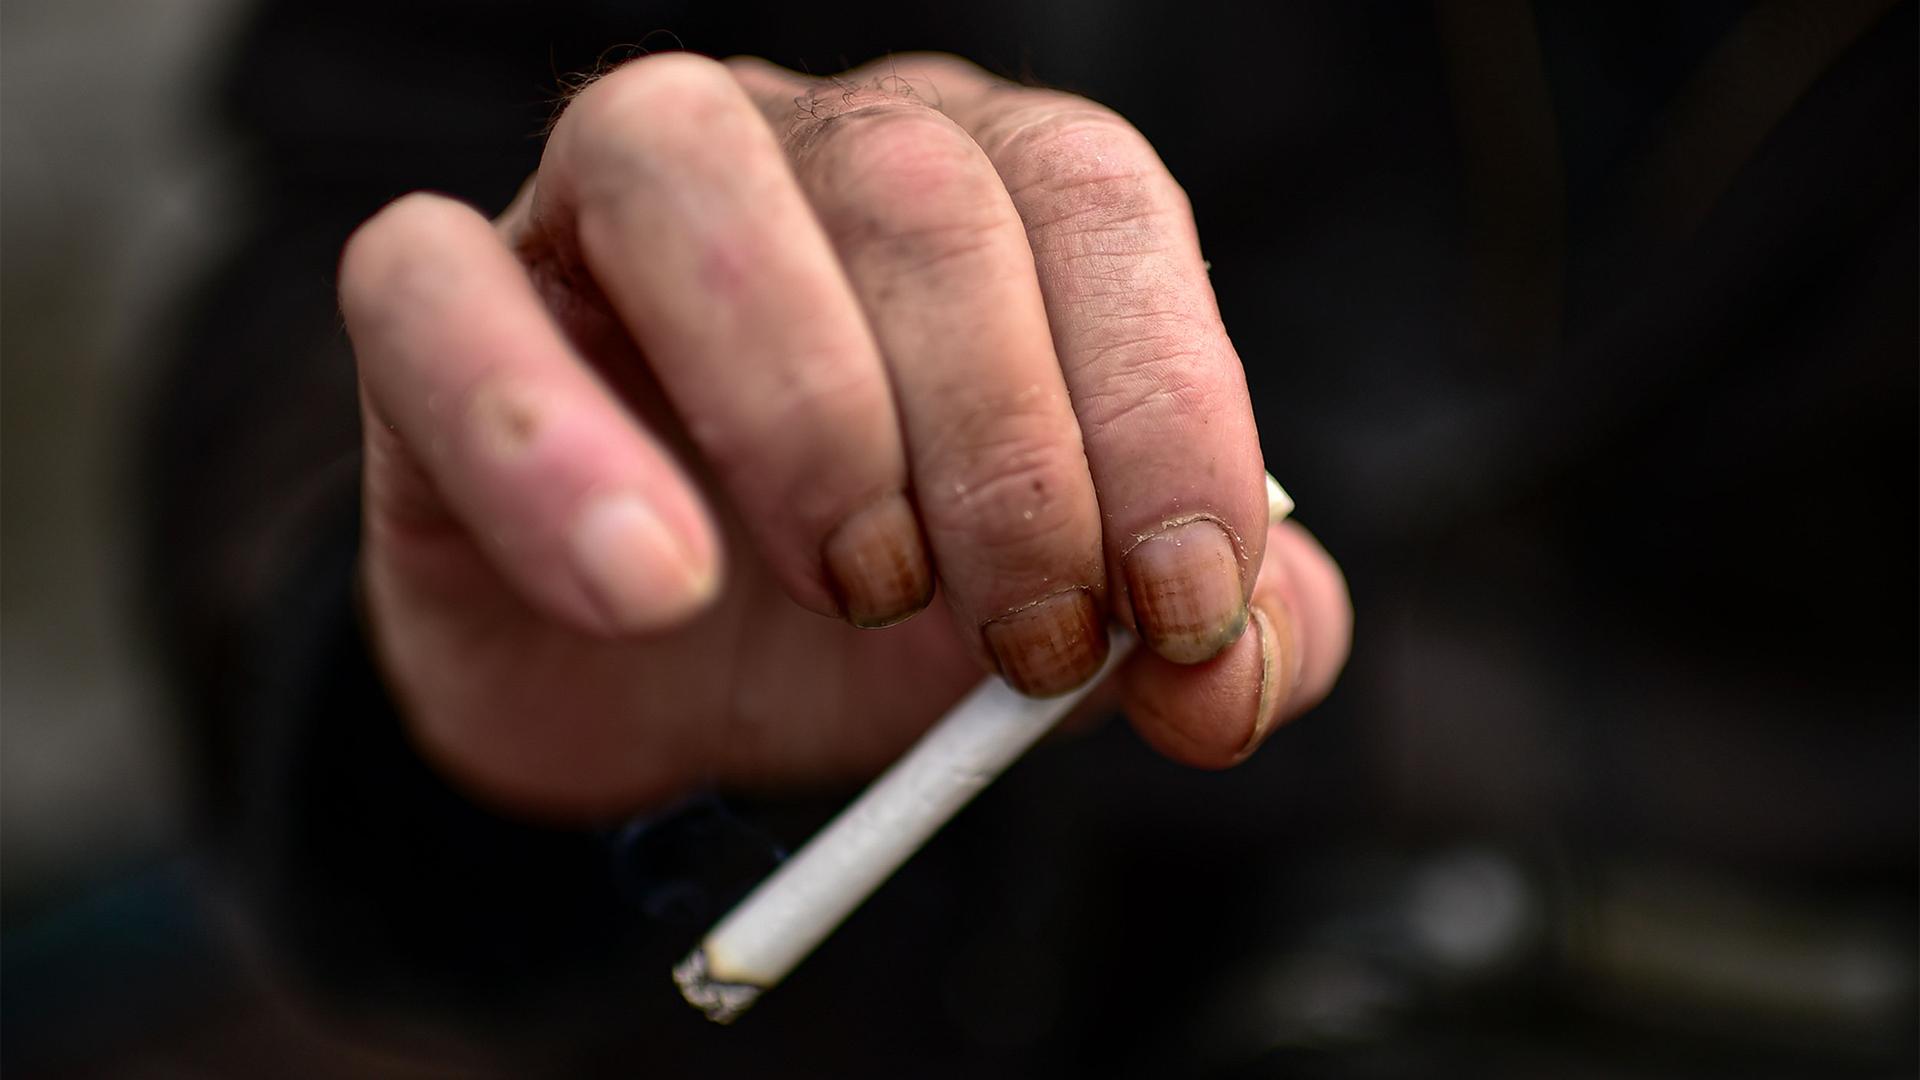 Antonio Trujillo holds a cigarette while resting on a bench, in Pamplona, northern Spain